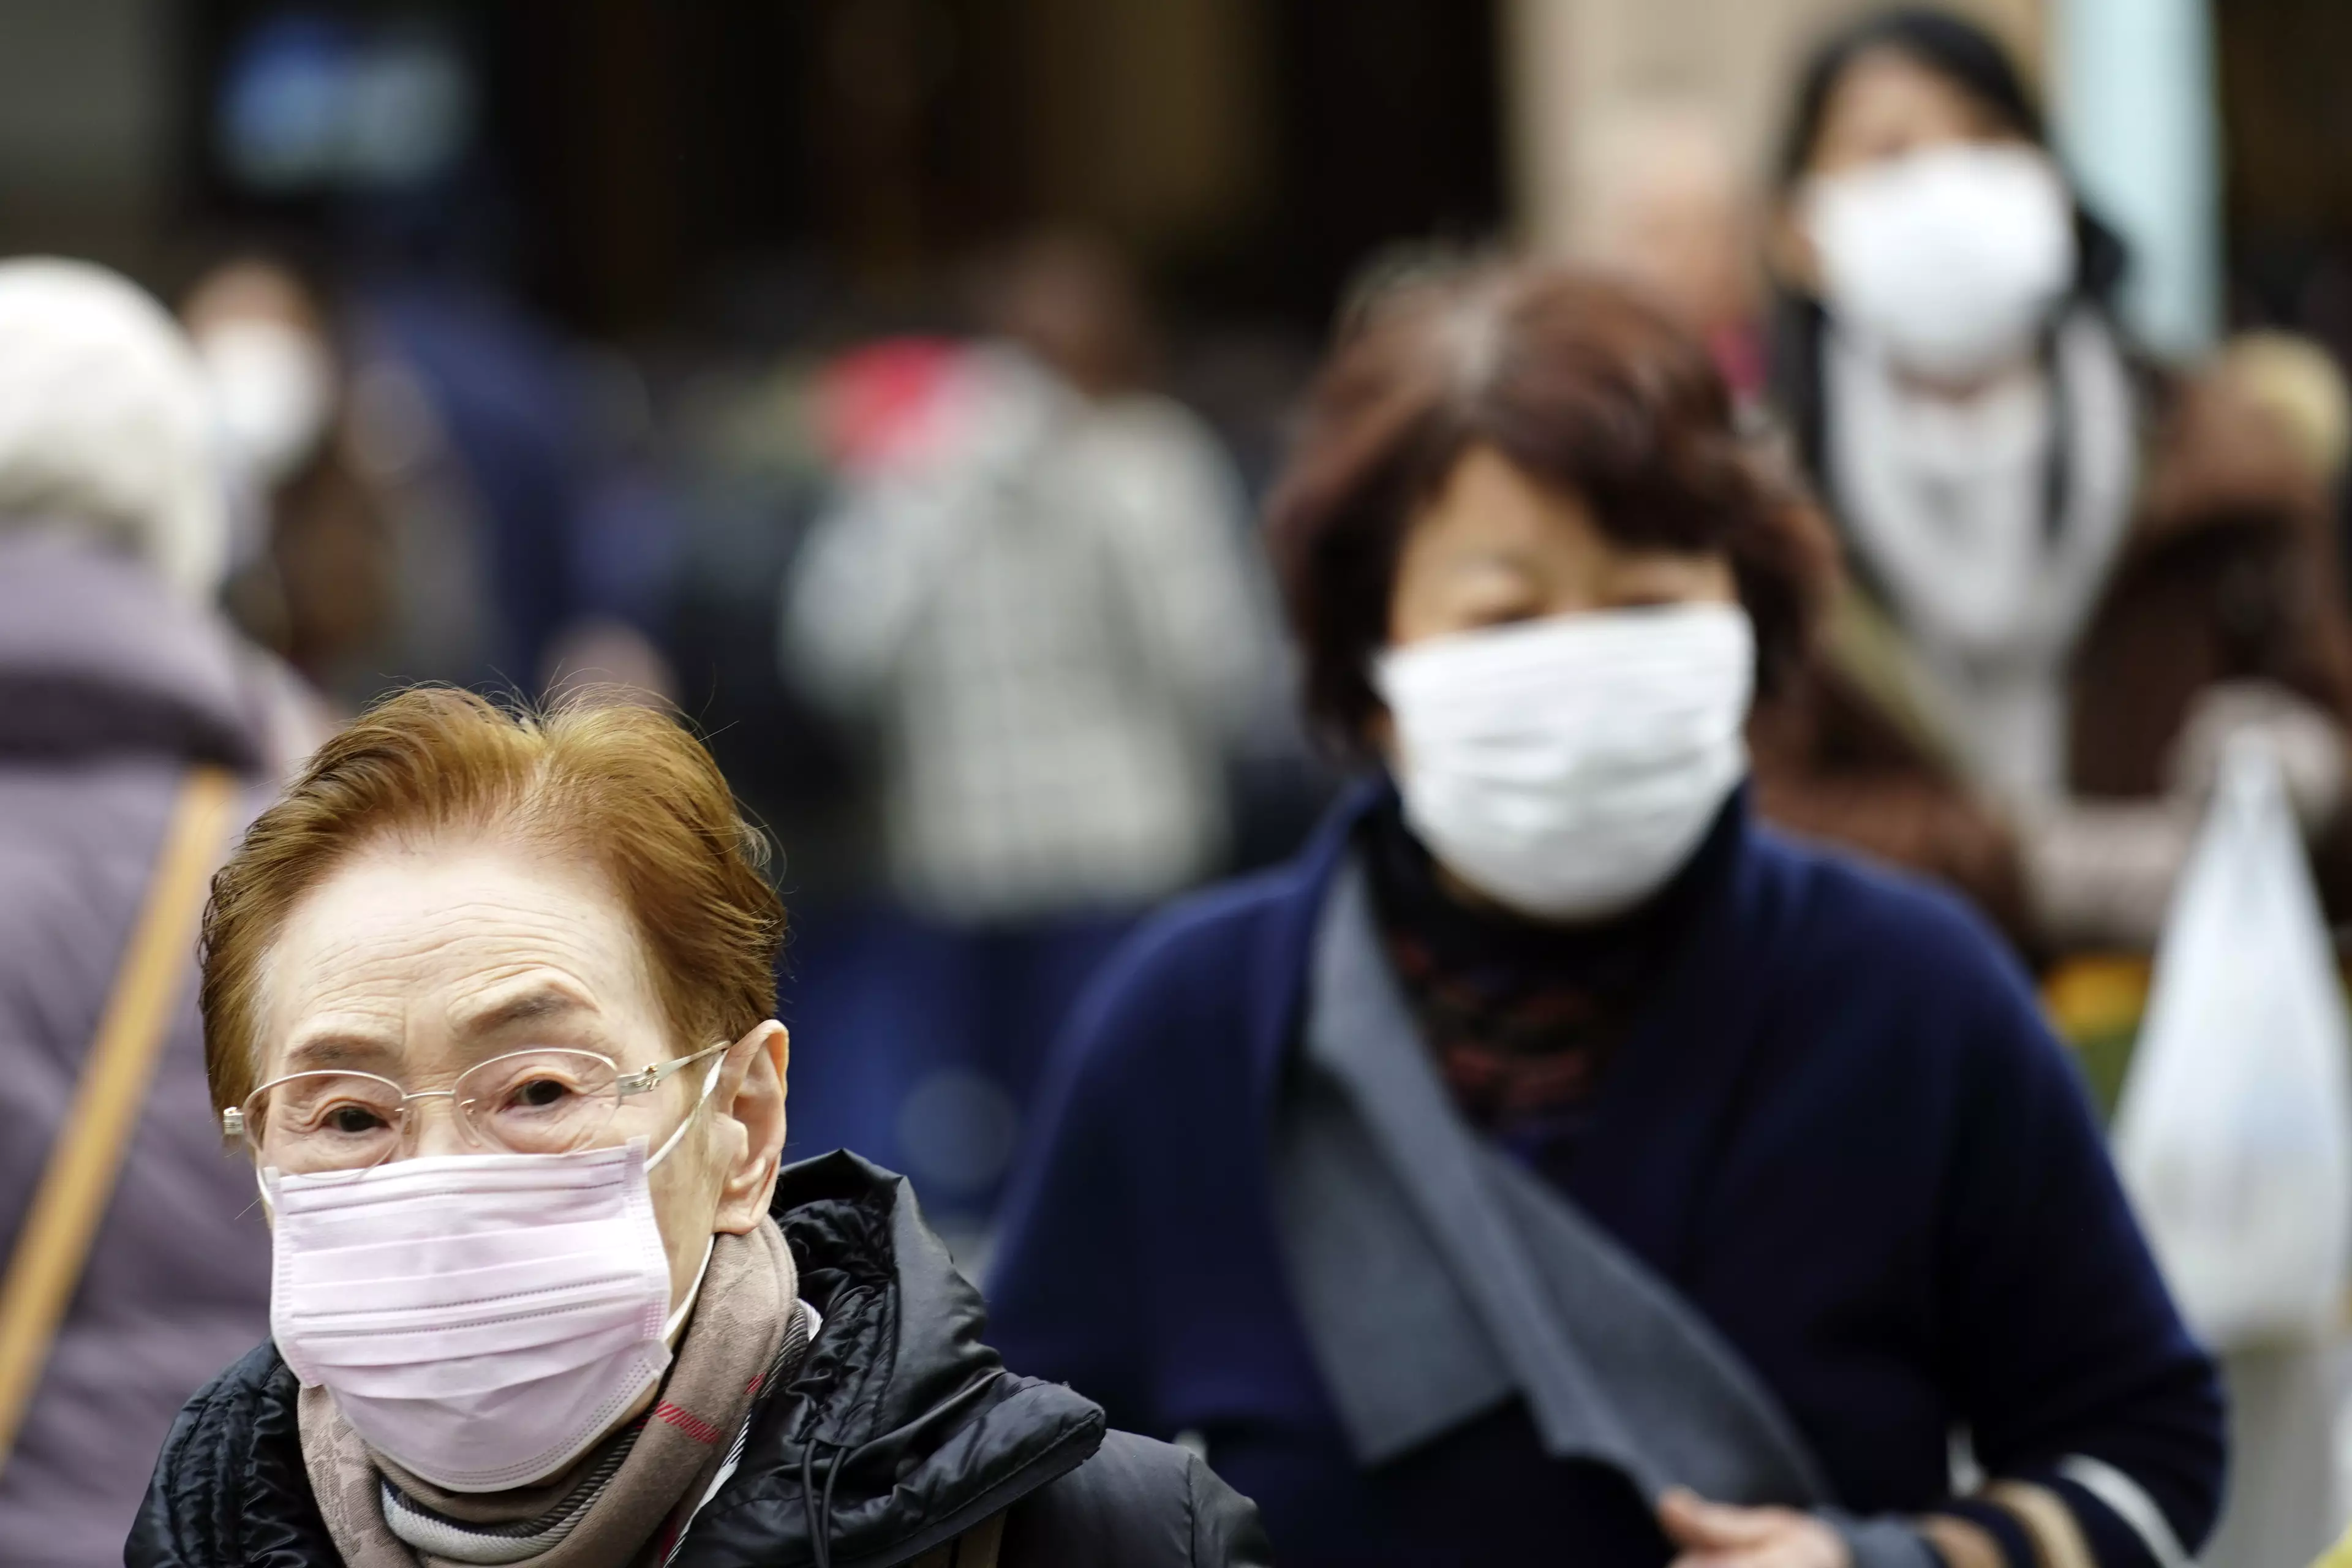 People have been buying face masks to protect themselves.